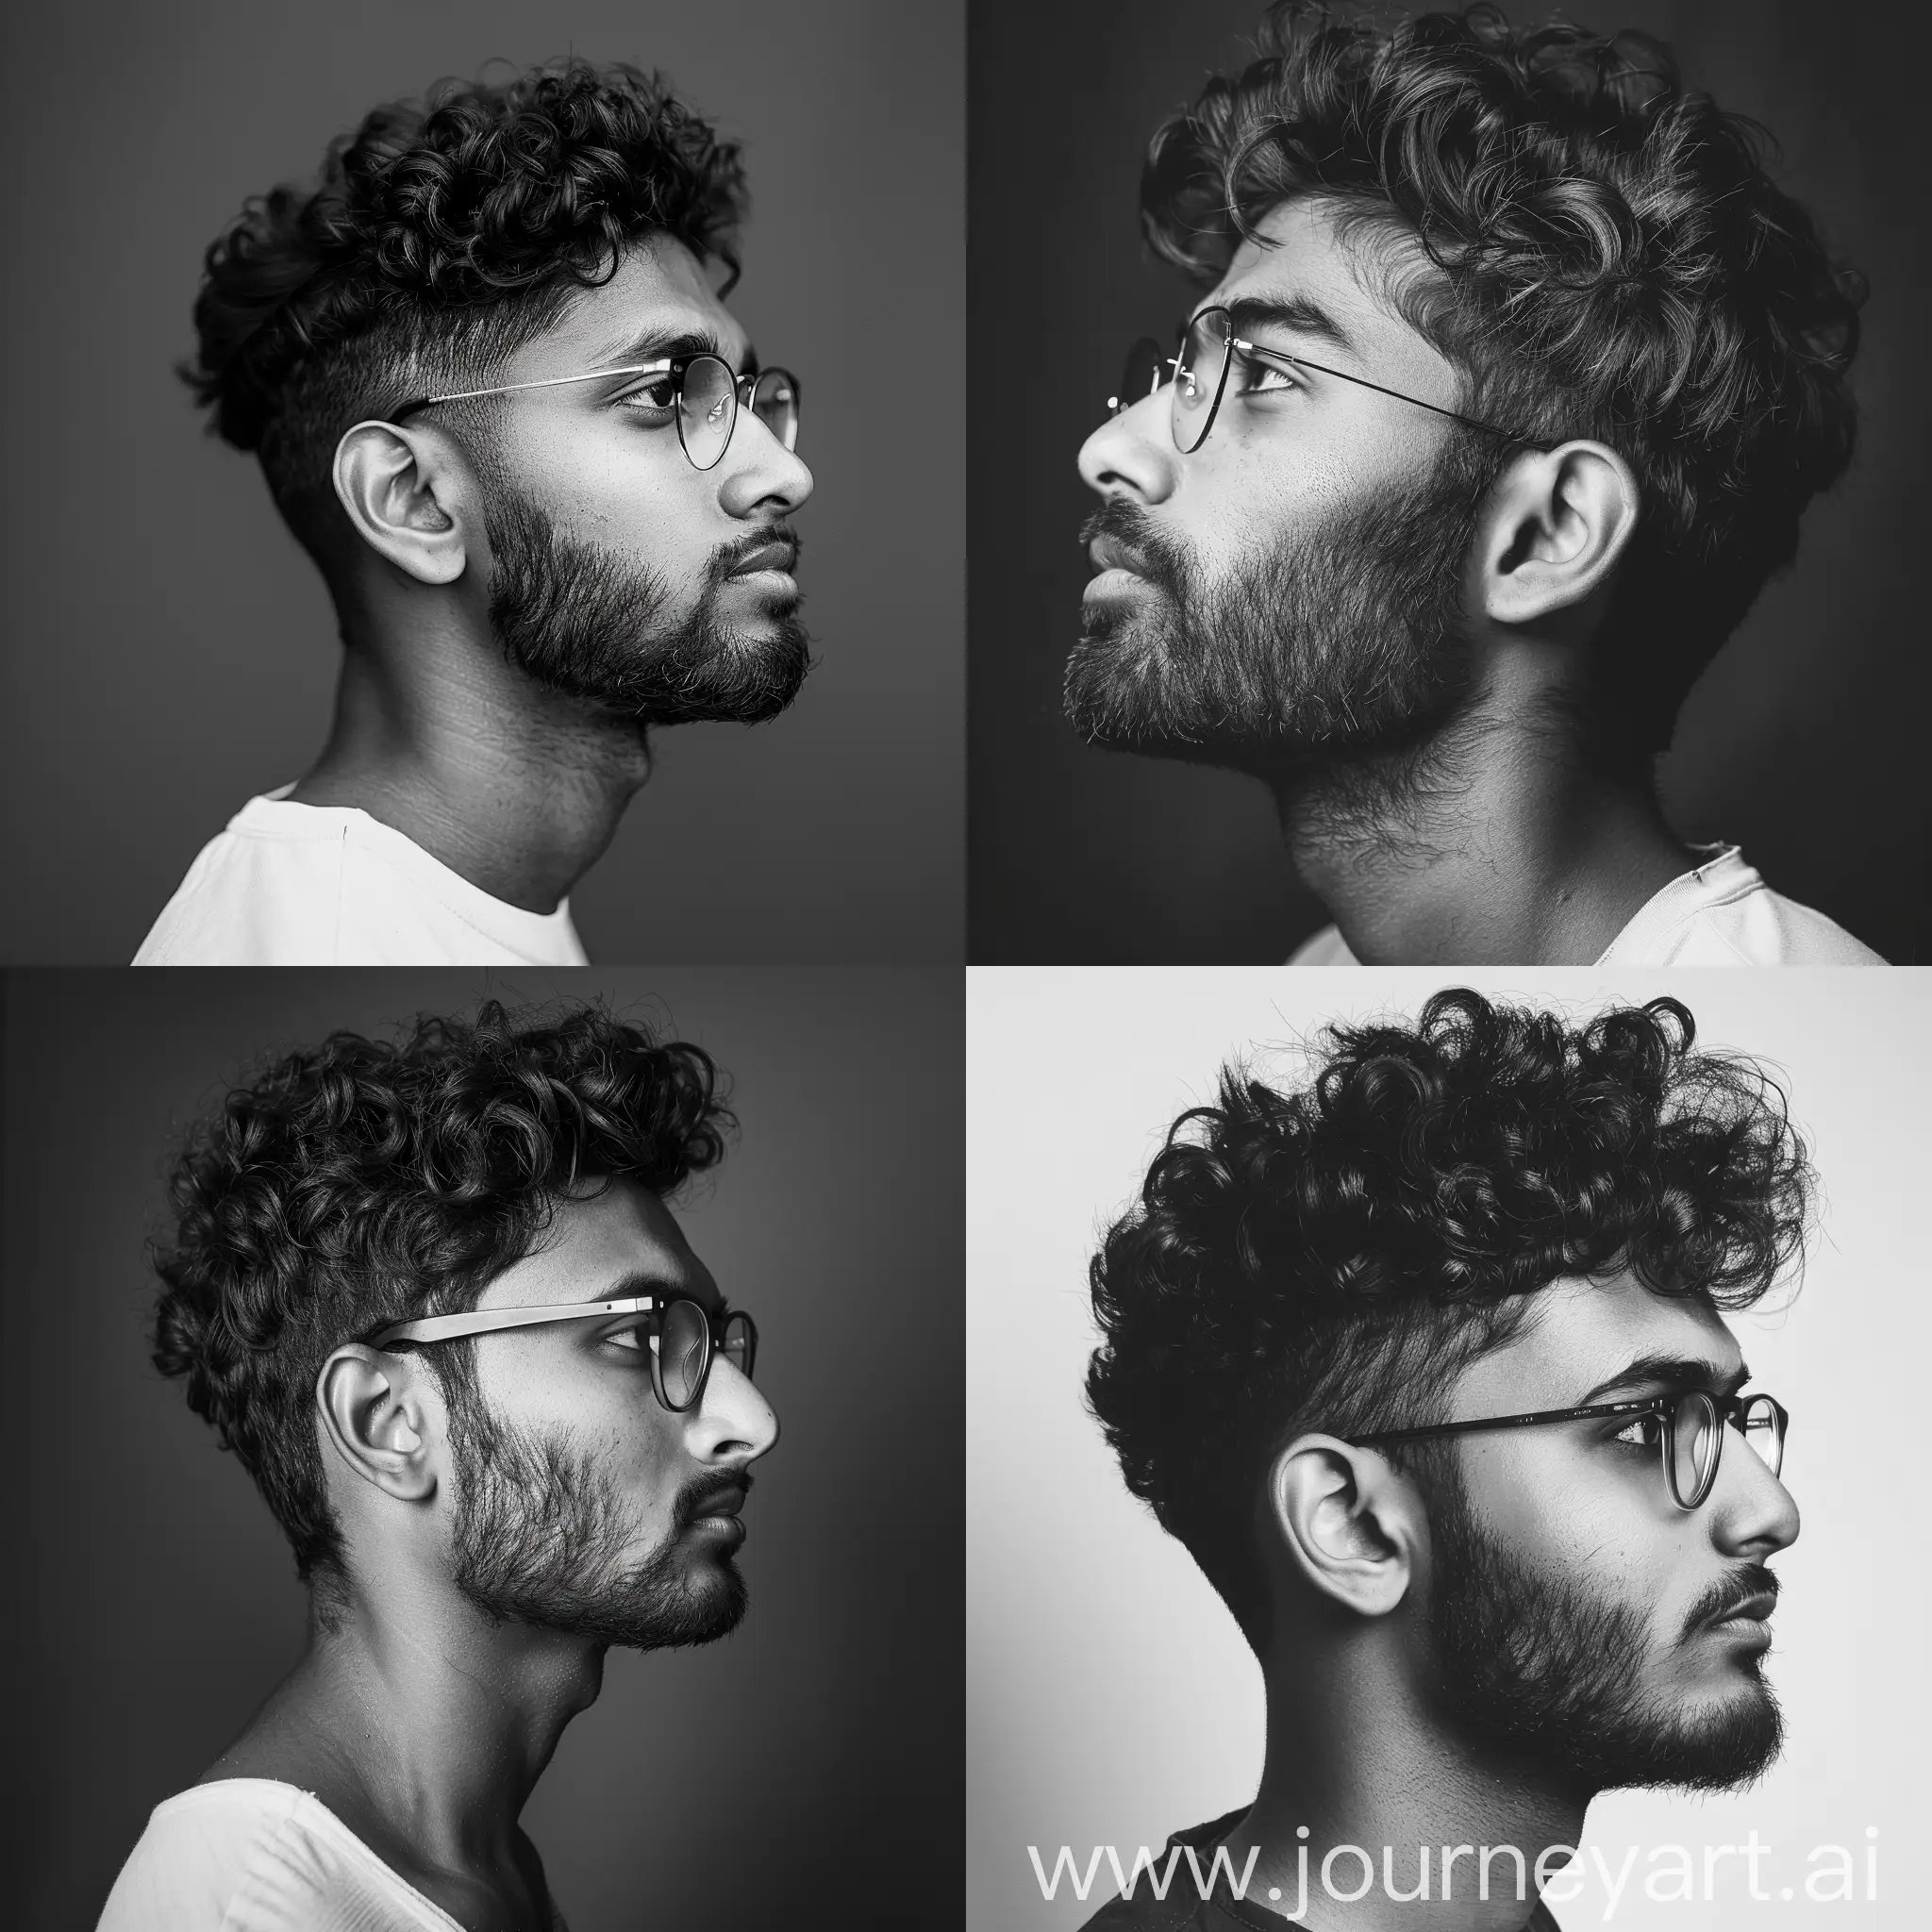 indian men, athletic build, oval face, short trimmed beard, fair complexion, smart glasses, with tapered sides and medium curly hair, left profile